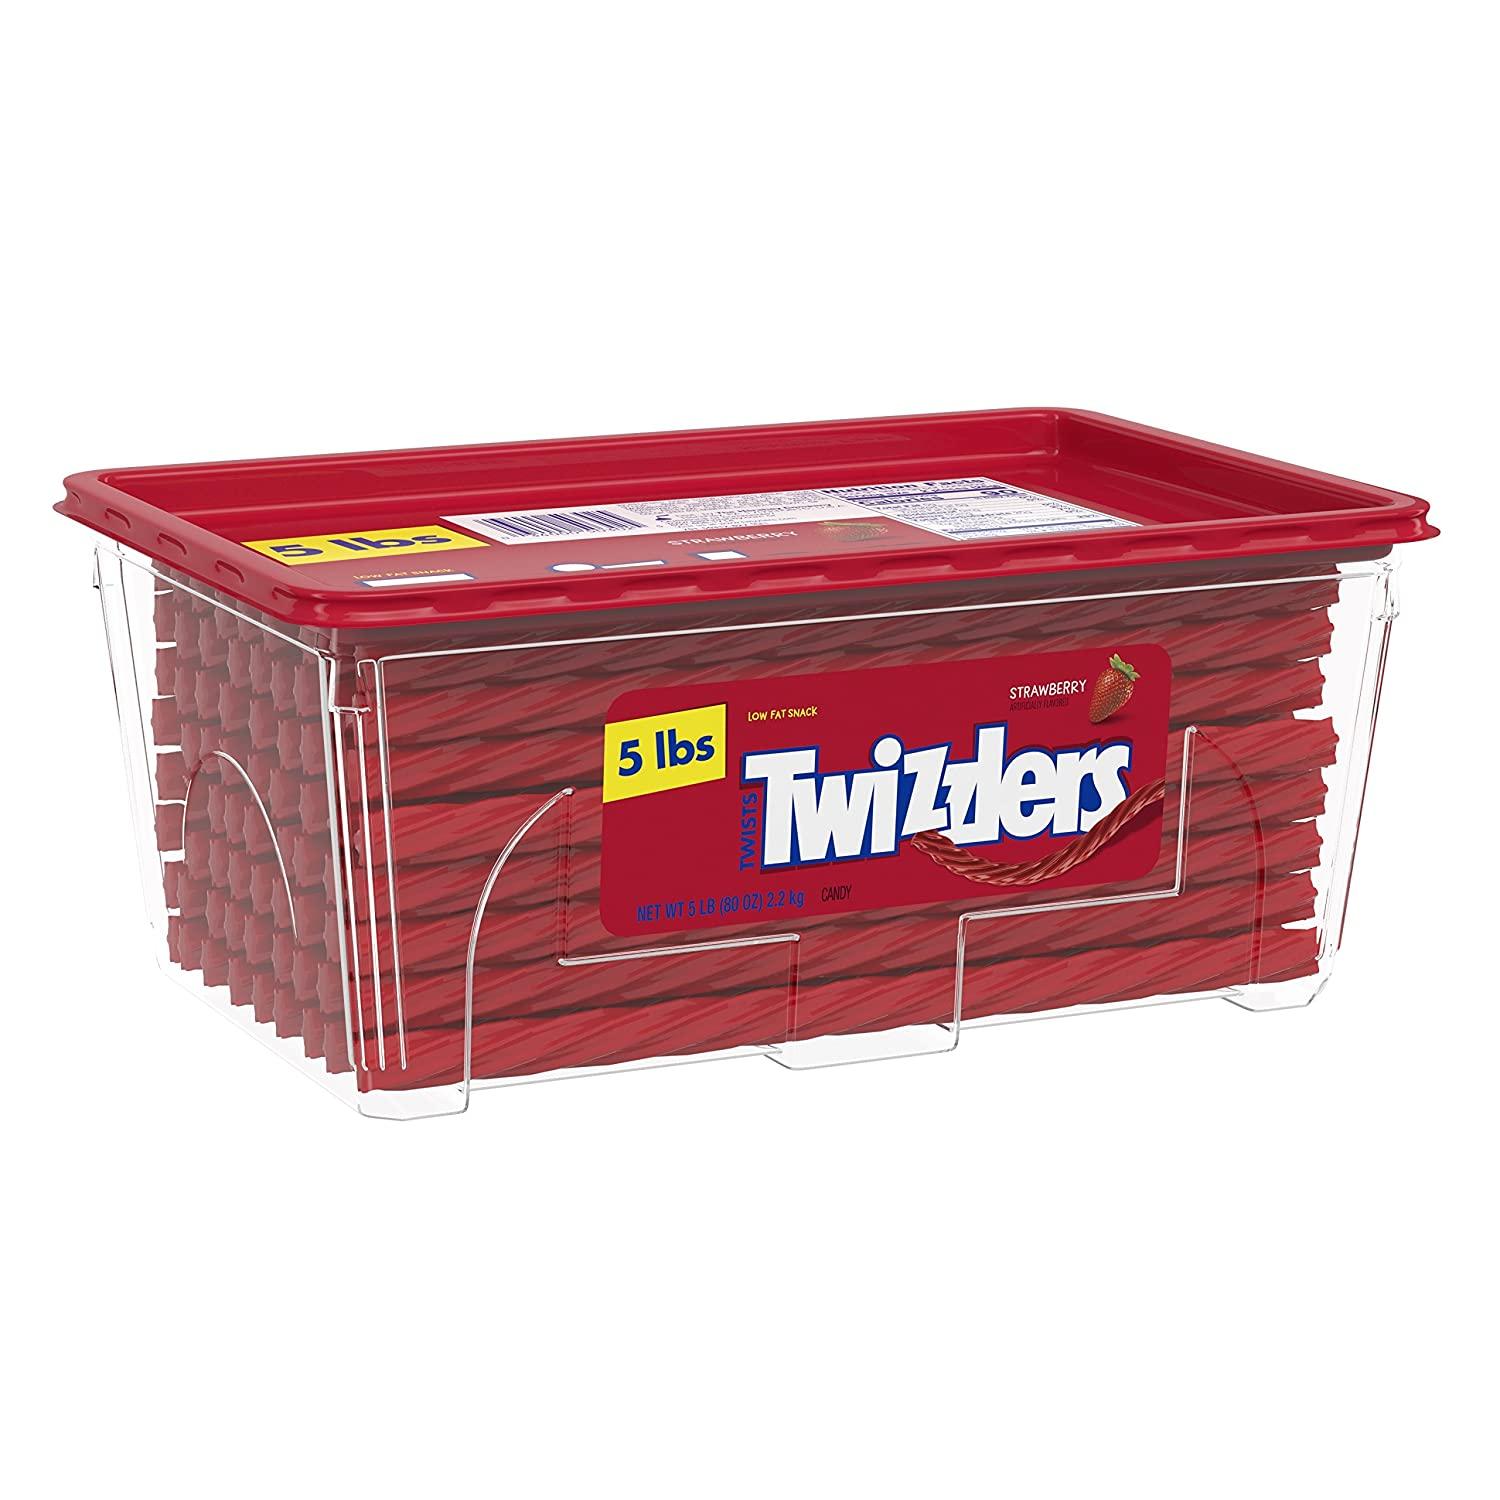 5Lbs Twizzlers Twists Licorice Candy for $6.74 Shipped